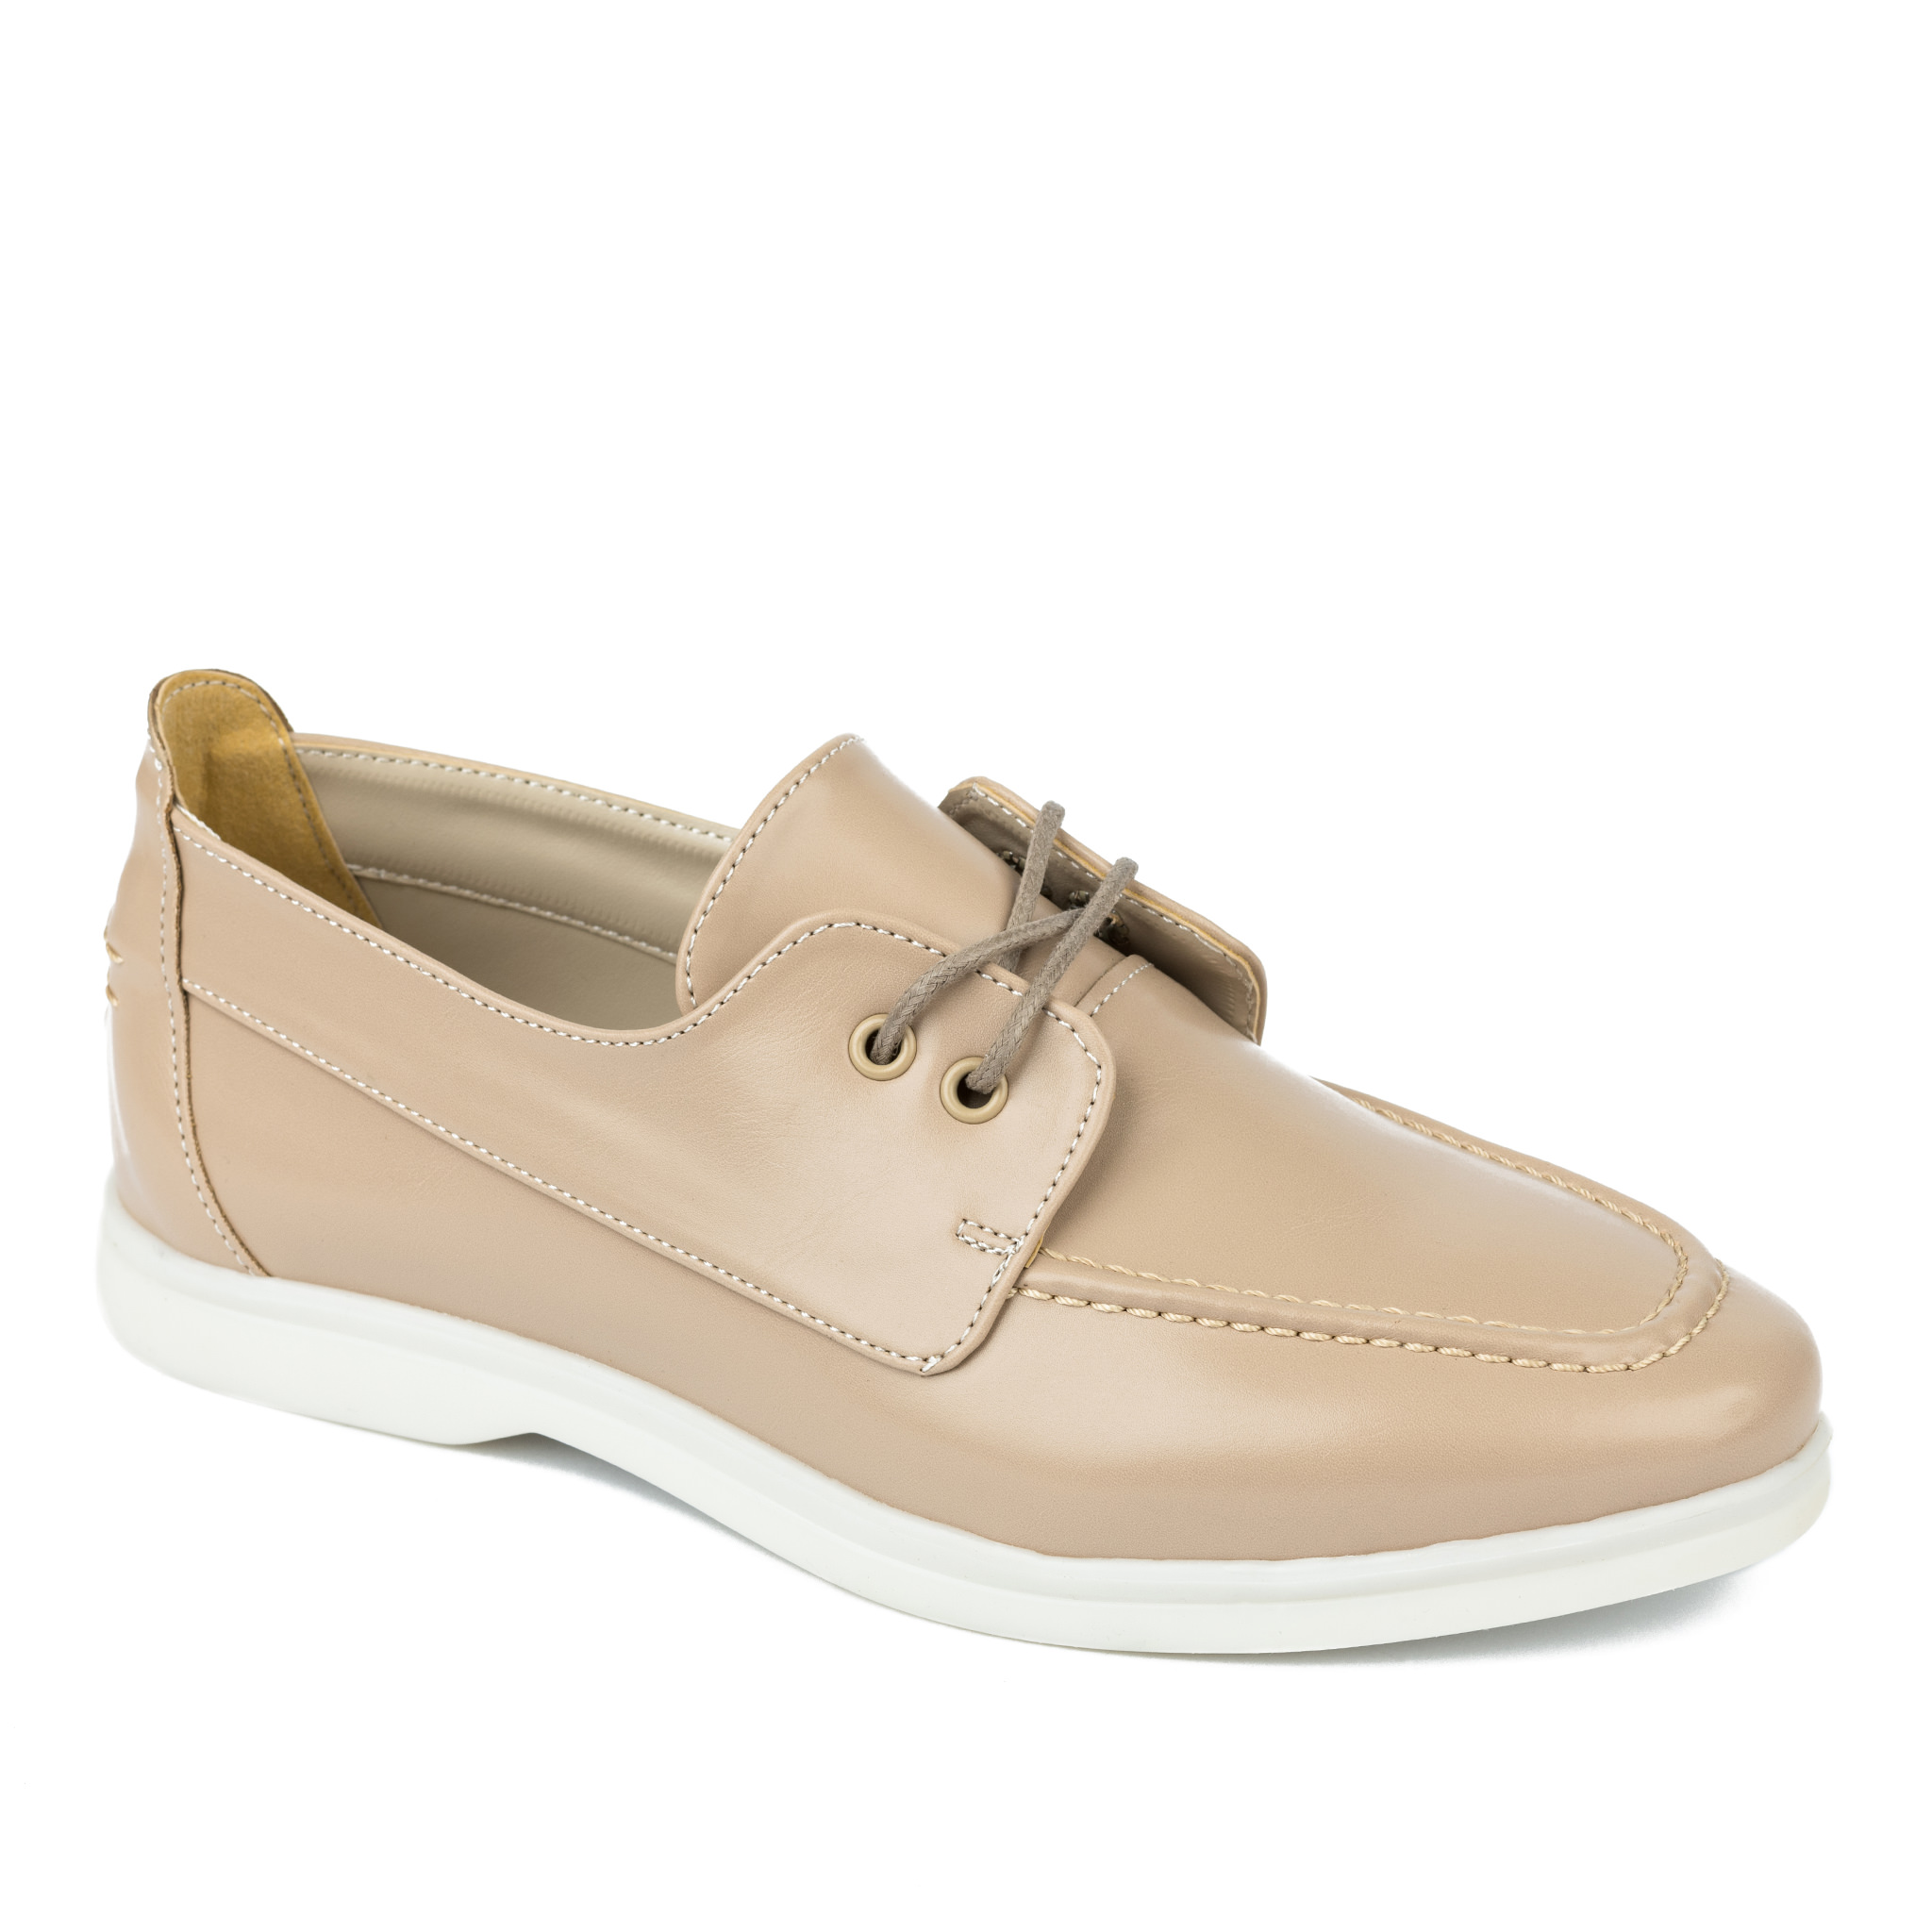 OXFORD LACE UP SHOES - BEIGE